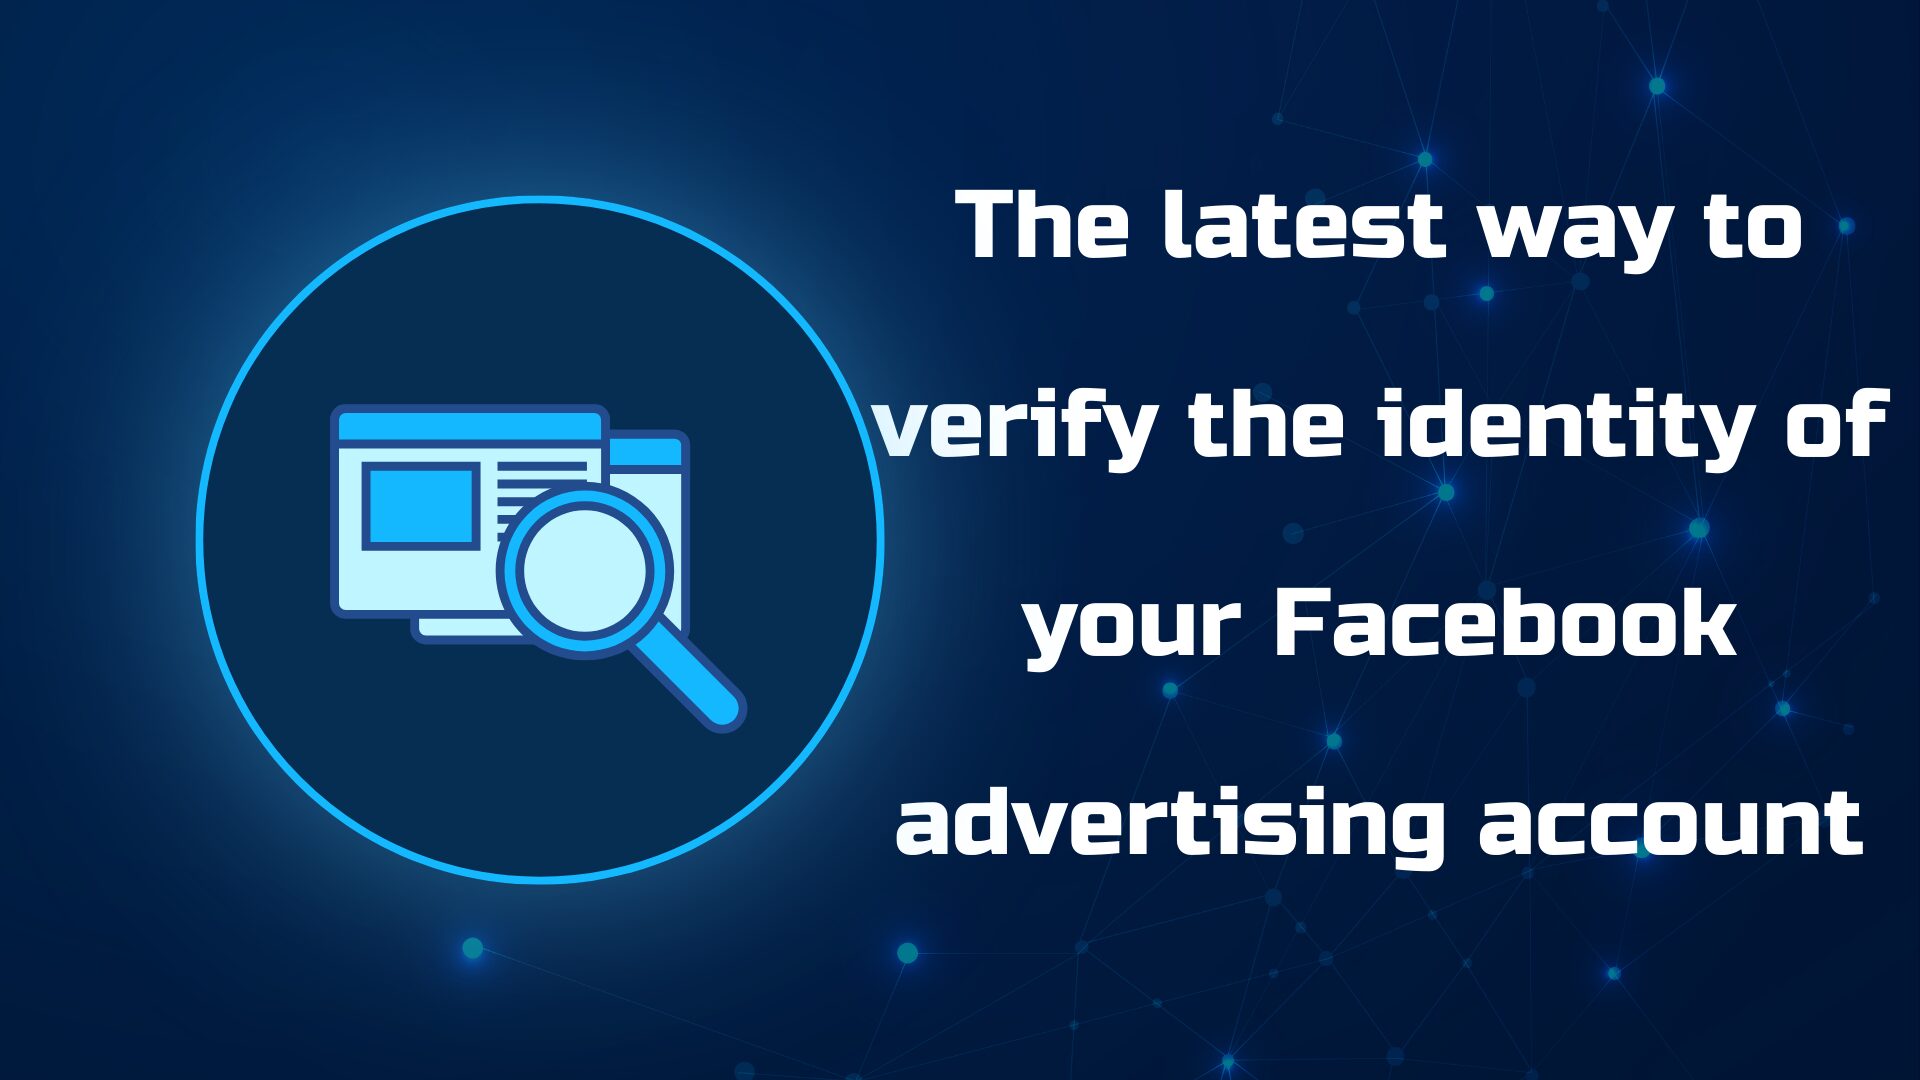 The latest way to verify the identity of your Facebook advertising account